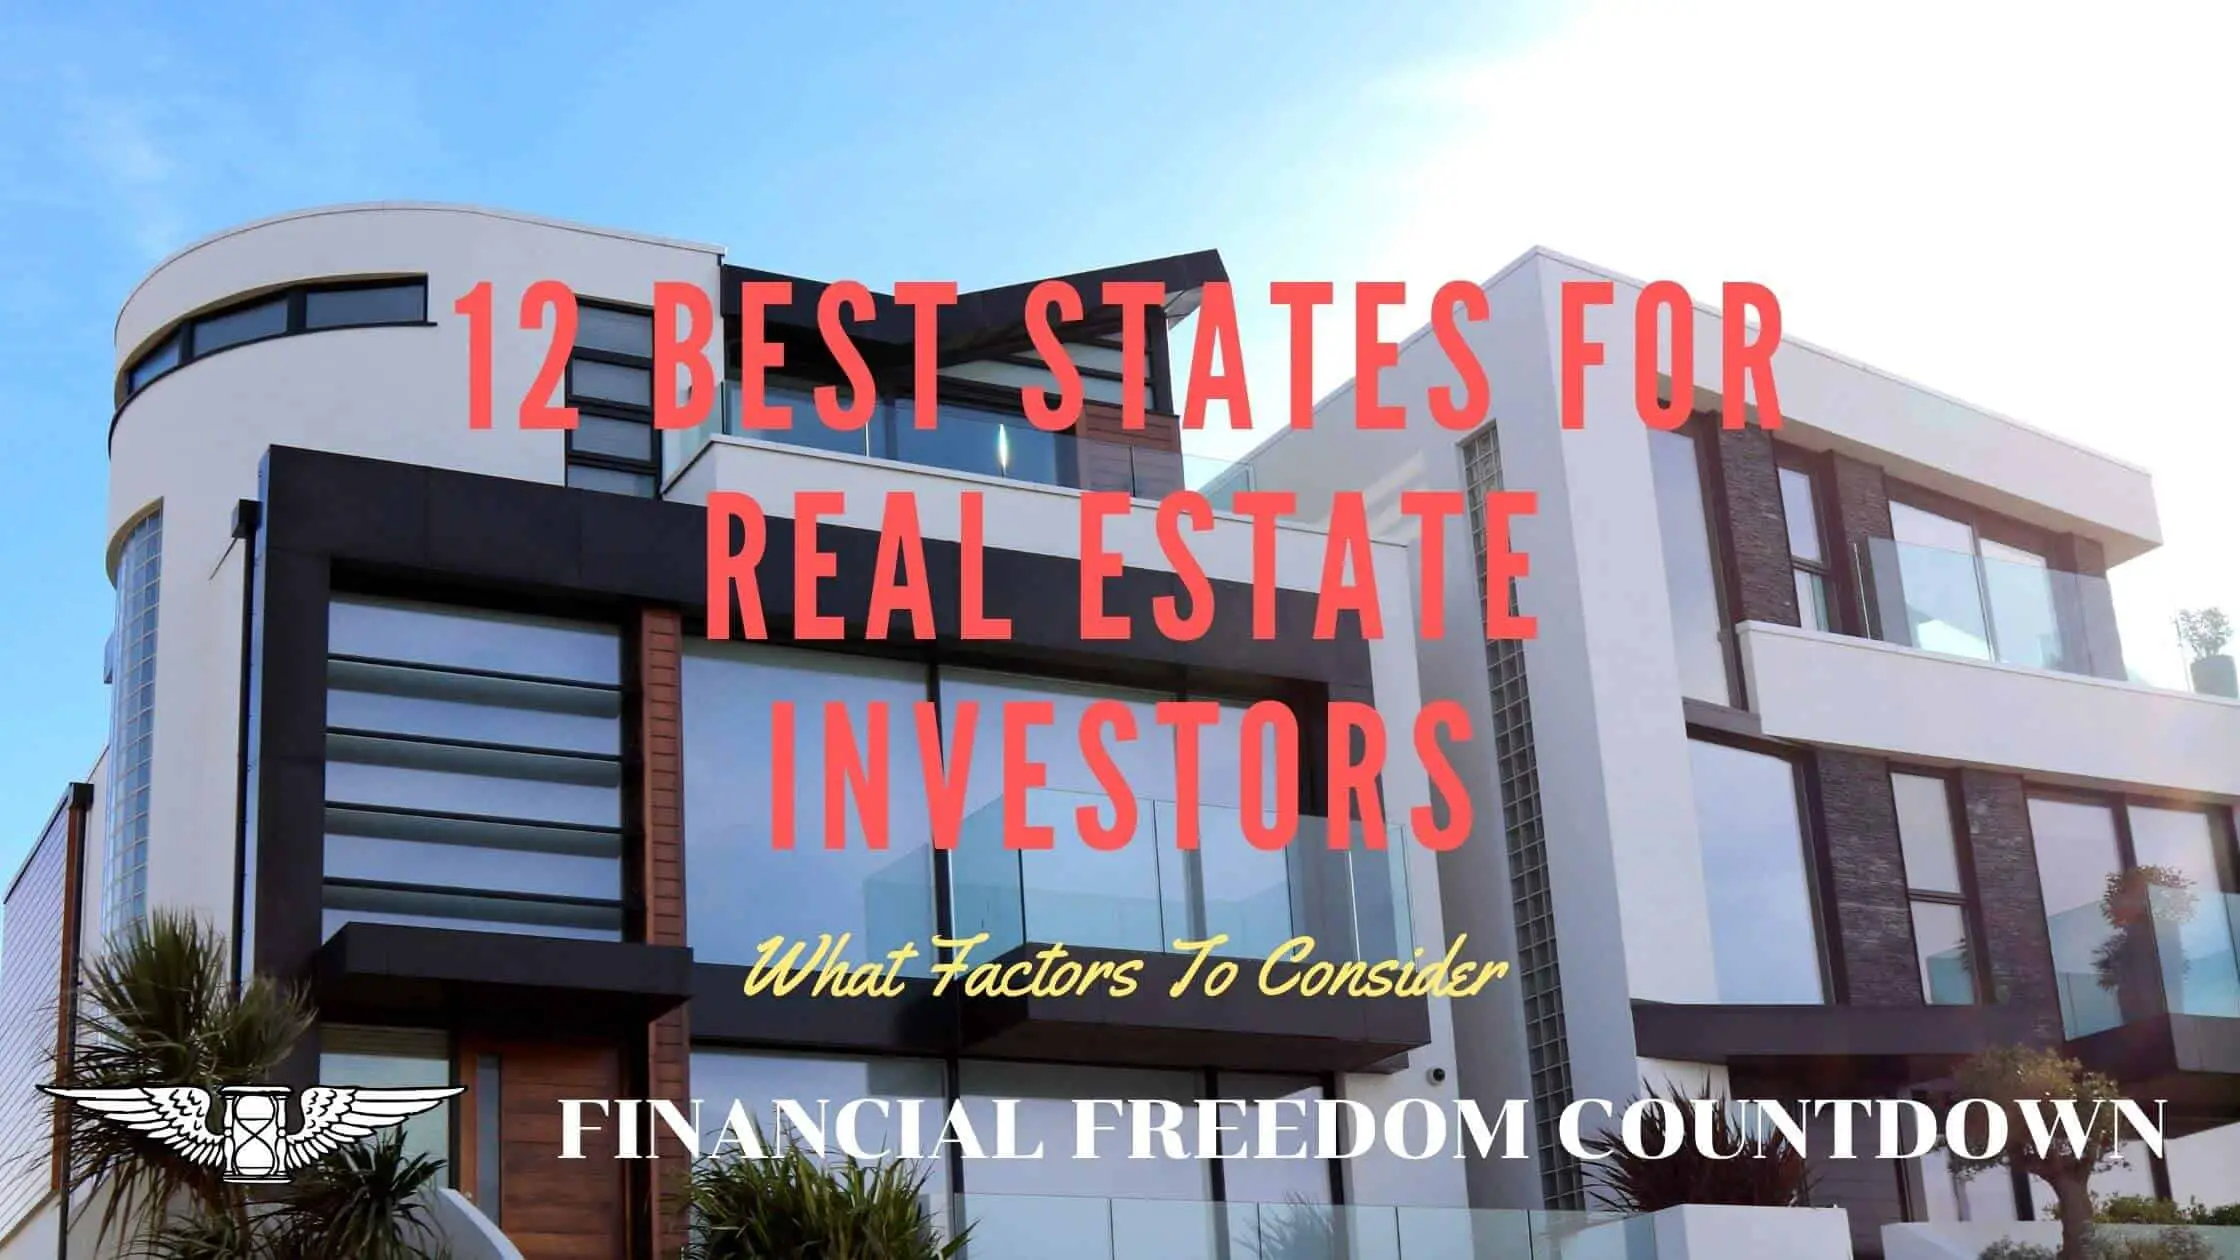 Which state is best for real estate investment